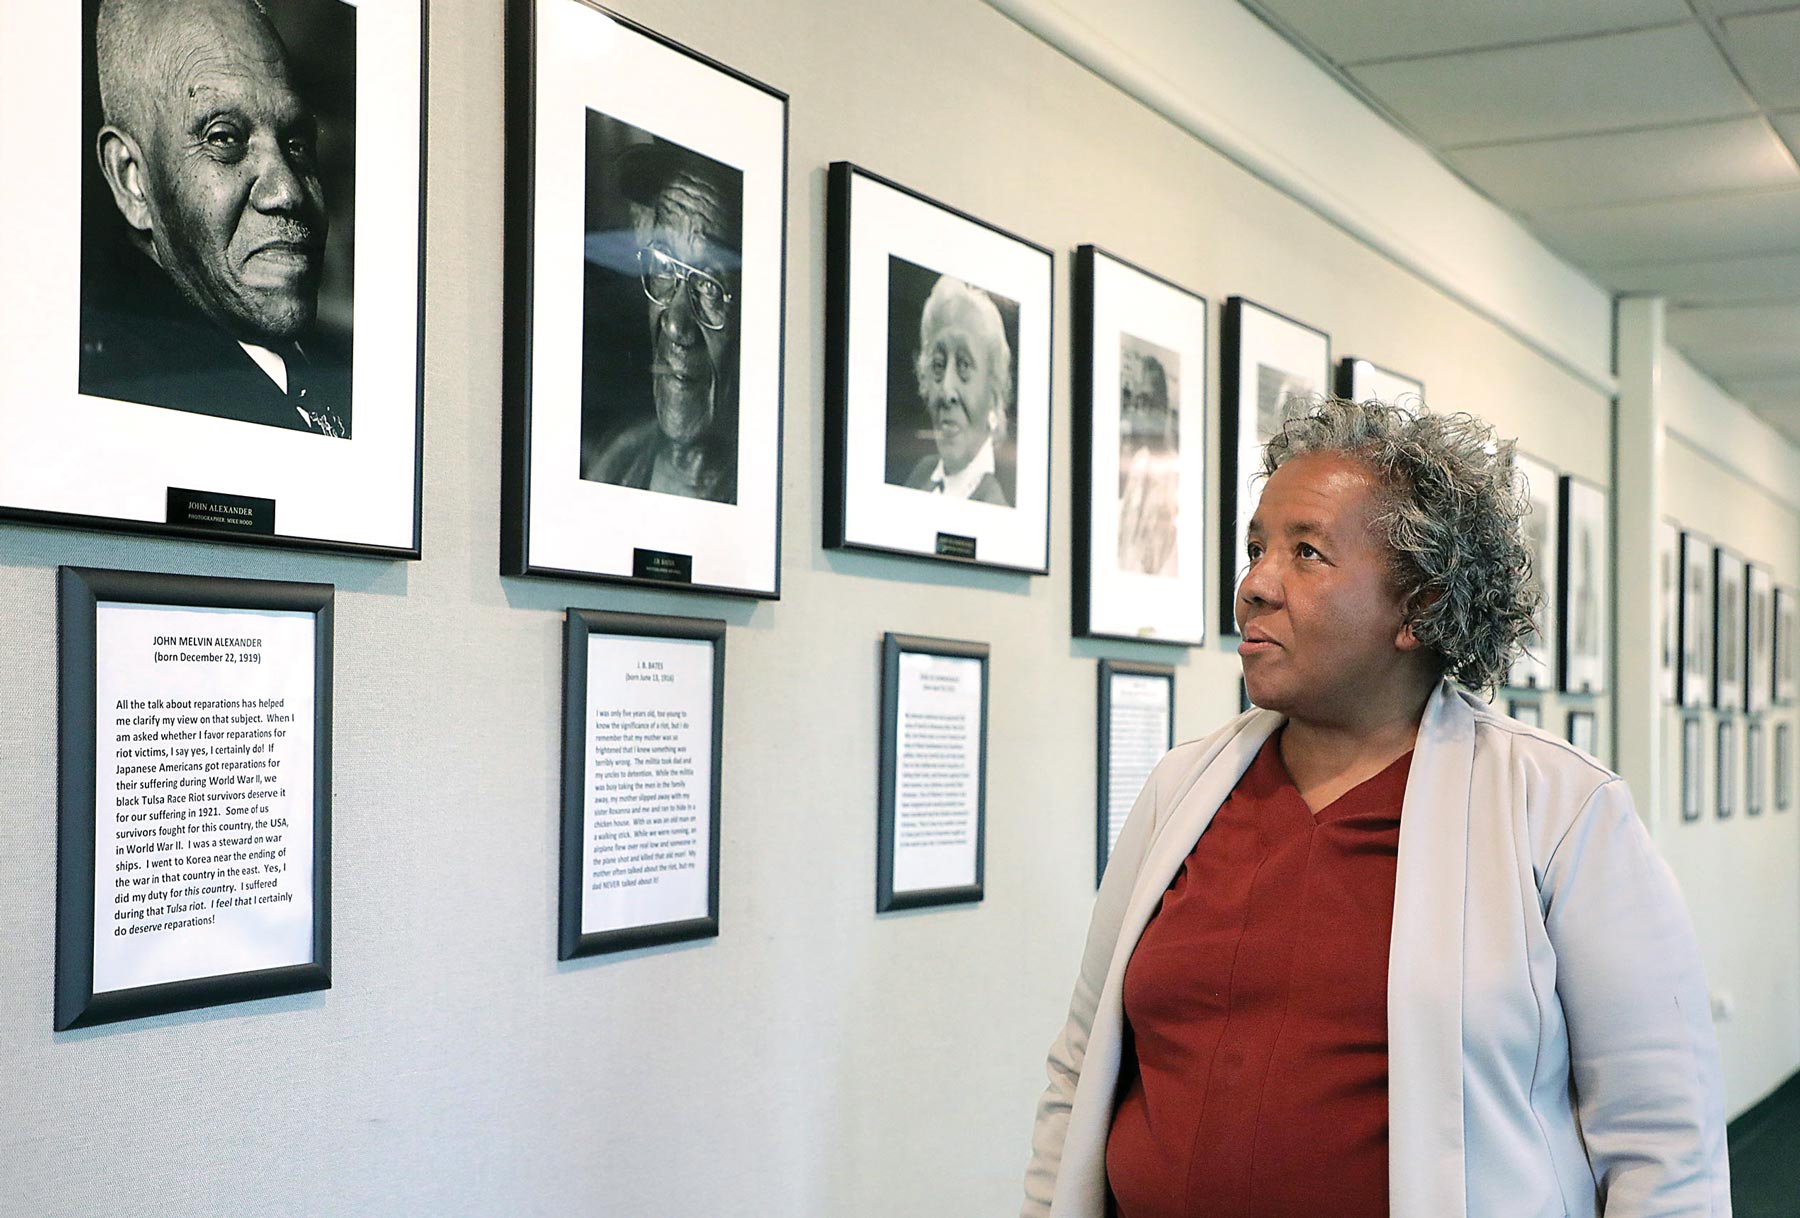 Sandra Alexander, wearing a maroon shirt and gray jacket, looking up at a black-and-white portrait of her father, John Melvin Alexander — one of many faces in a row of photographs